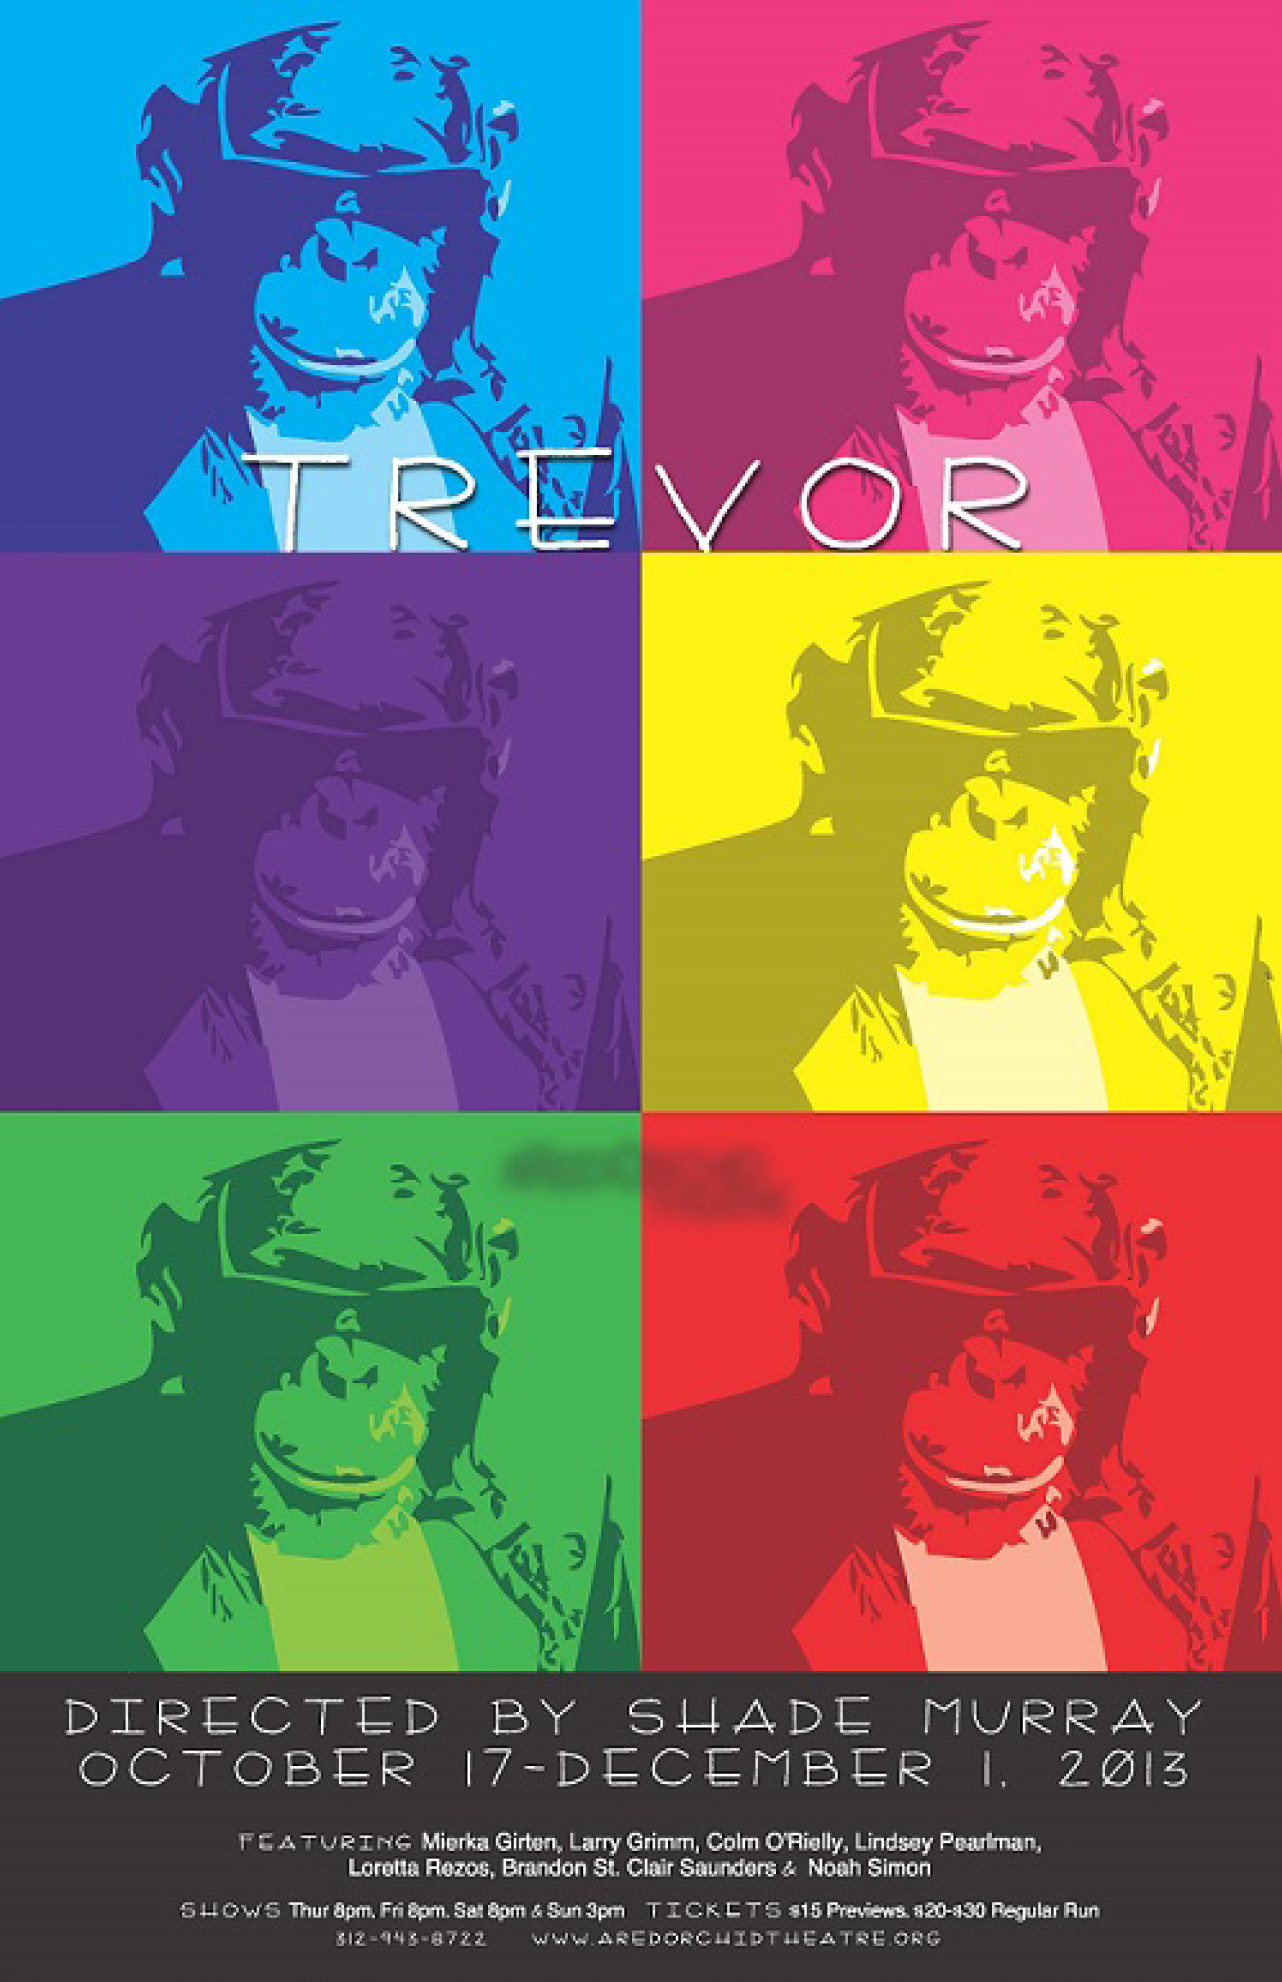 Inspired by true events, Trevor is a subversive comedy about fame, success, and the lies we tell ourselves in order to keep people from taking away our erratic, 200-pound chimpanzee. At the center of this hilarious and terrifying play are two individuals fighting against a world unable to understand their love- Trevor, a chimpanzee who once performed in commercials with the likes of Morgan Fairchild, and his owner Sandra, who promises he would never hurt a fly. Nick Jones’ surprising play explores family, flawed communication, and the complexity of “acting like a man.”